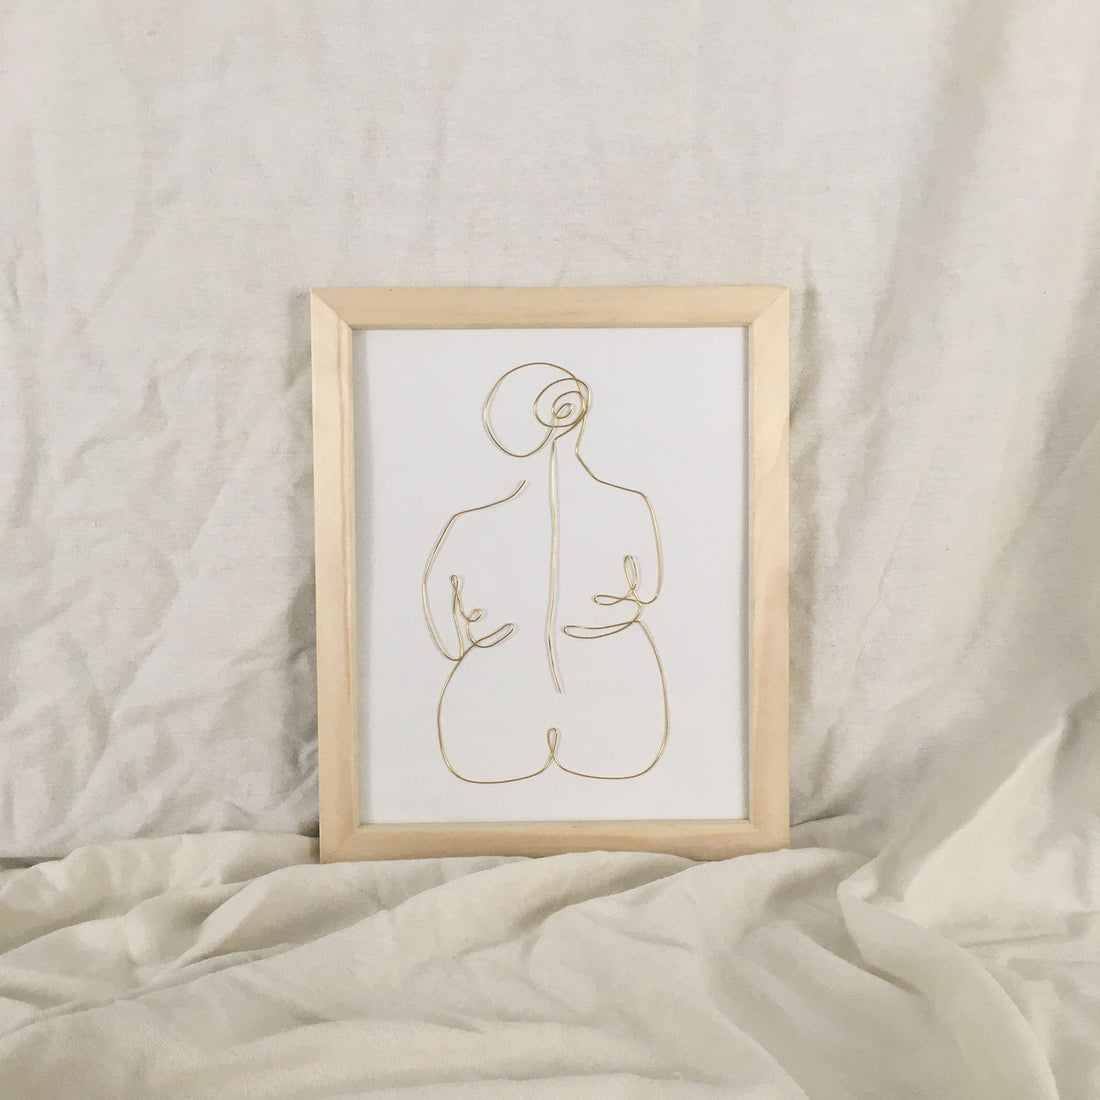 Lounge wire art - natural frame gold wire